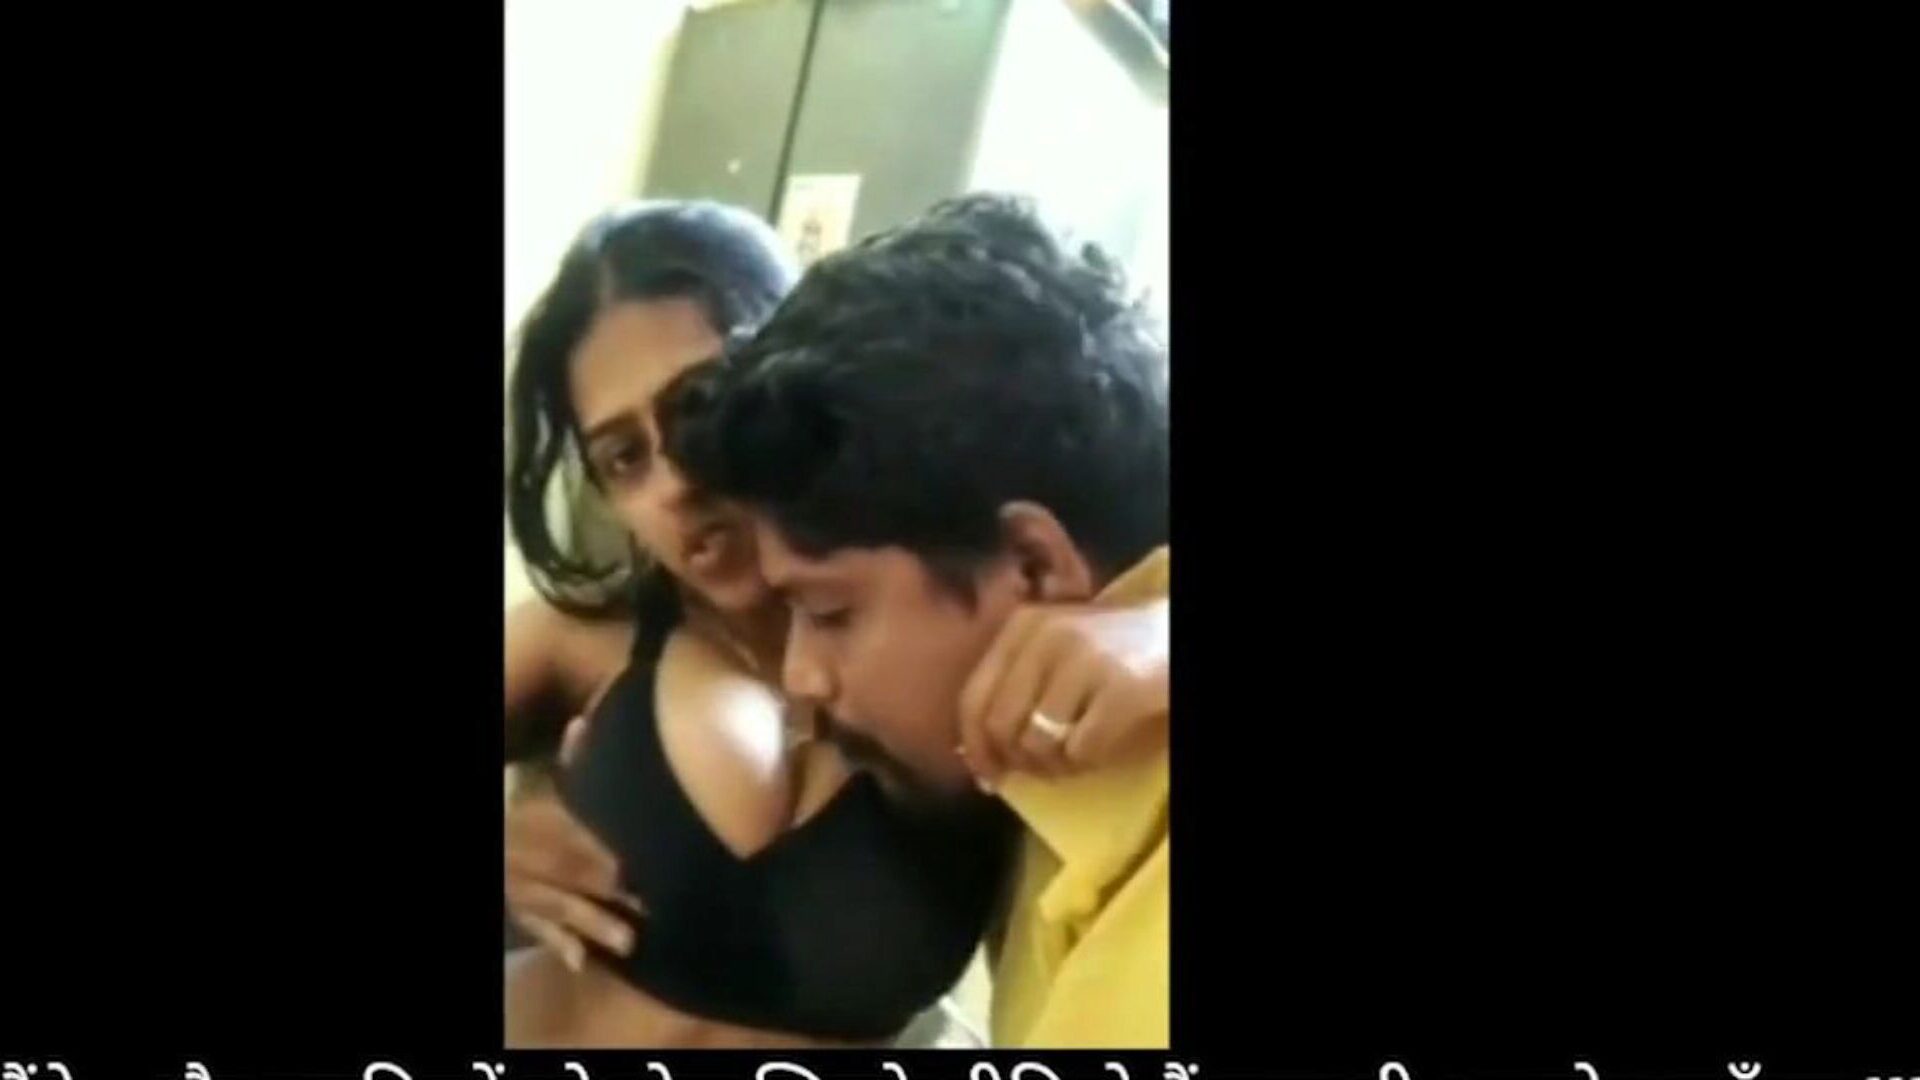 bhabhi devar home sex fun during lockdown: free hd porn fa watch bhabhi devar home sex fun during lockdown episode on xhamster - the final archive of free-for-all Indian free home sex hd xxx pornography tube vids